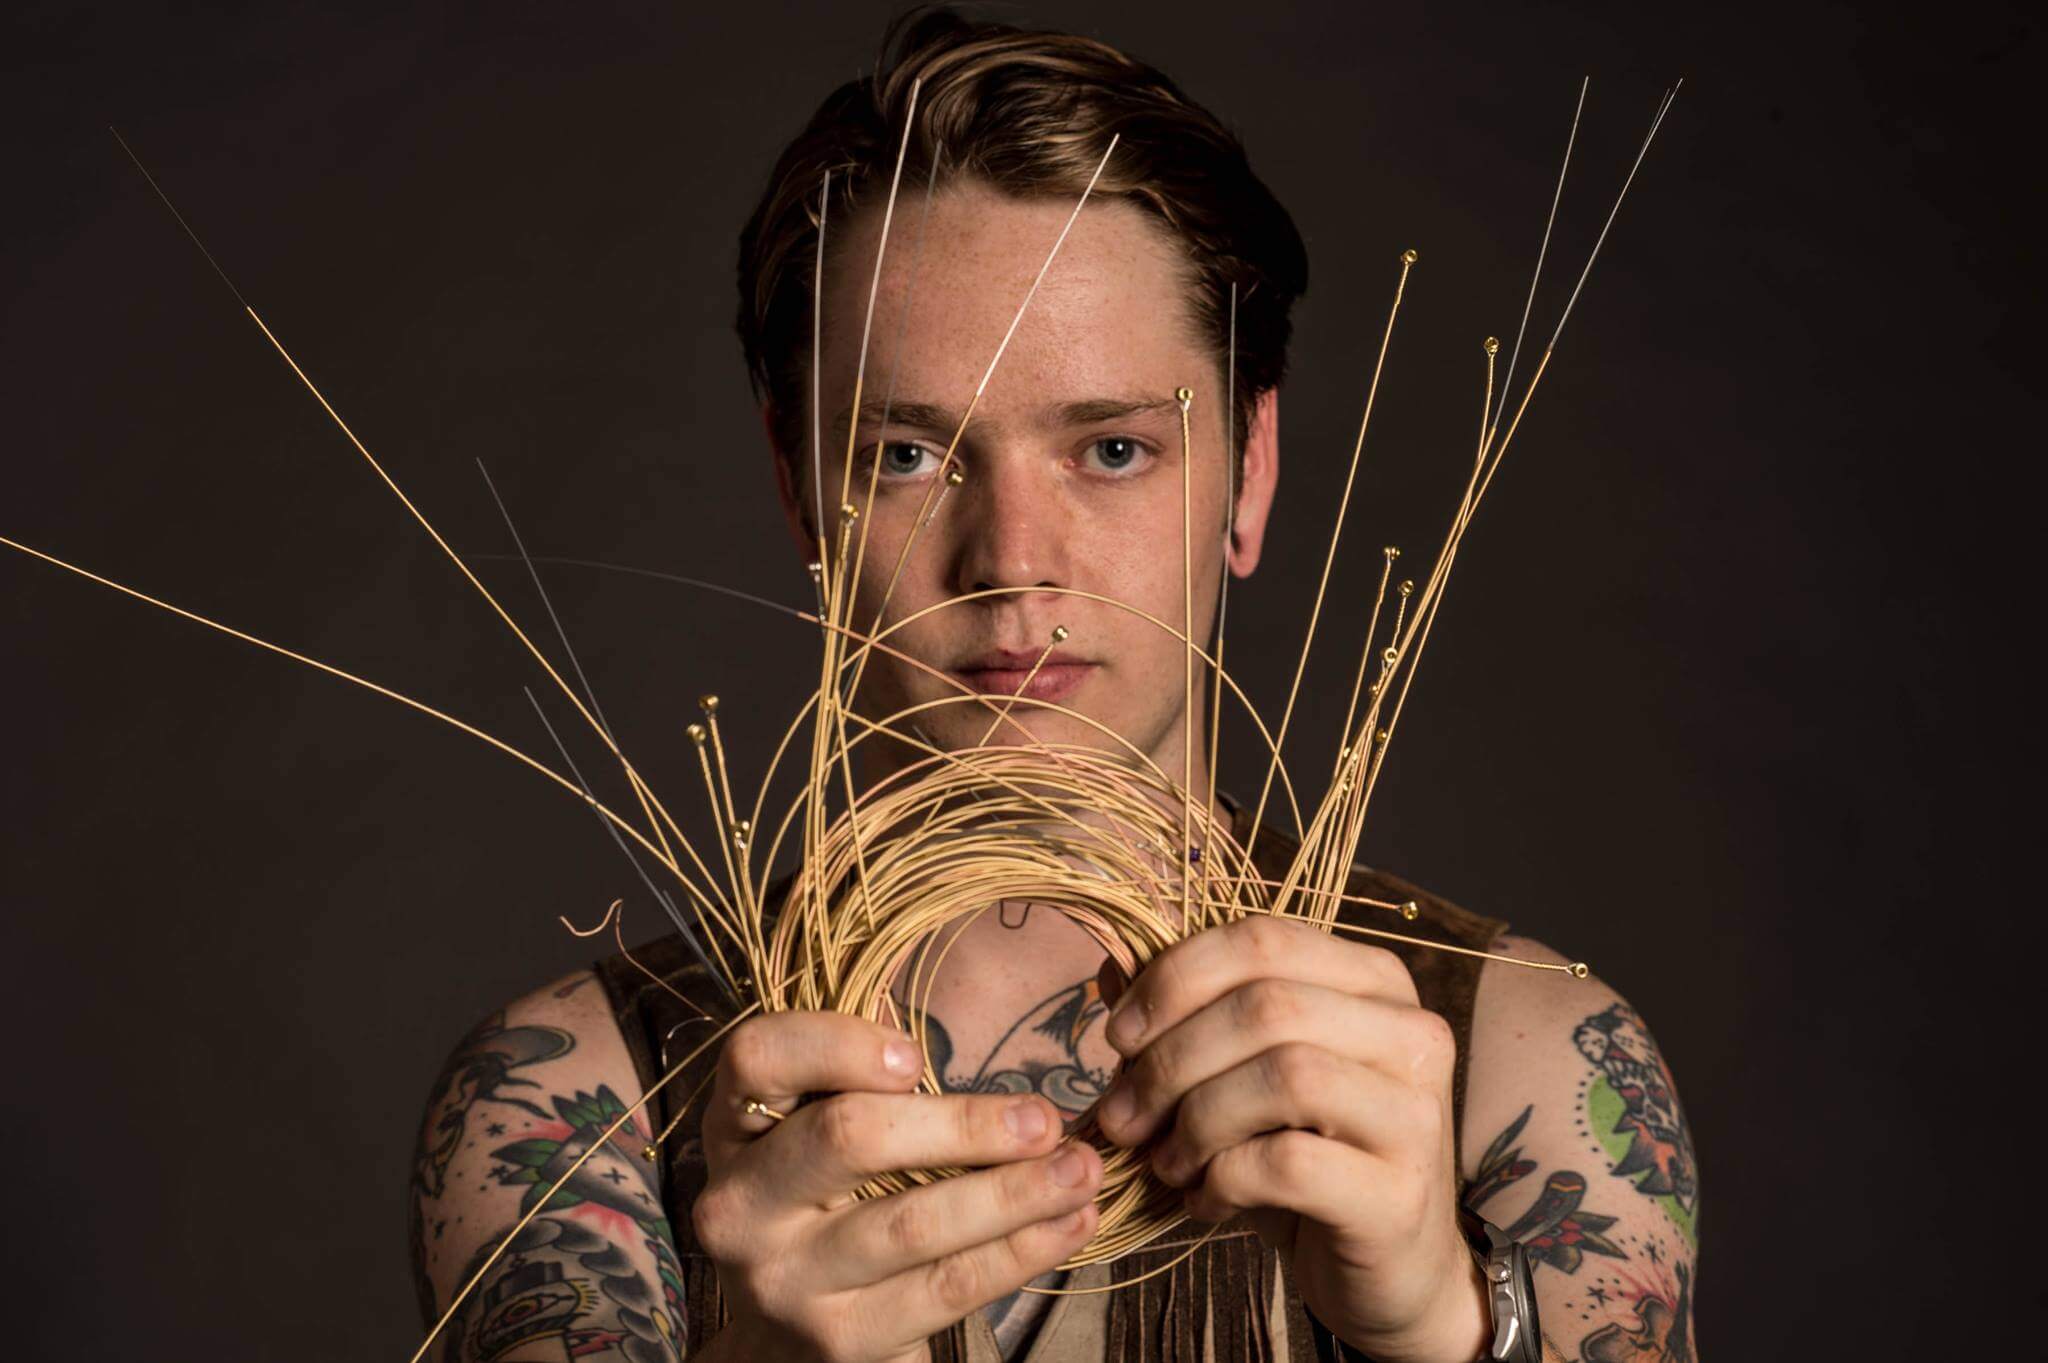 Billy Strings Reveals NSFW Knockers Tattoo My Eyes Are Up Here